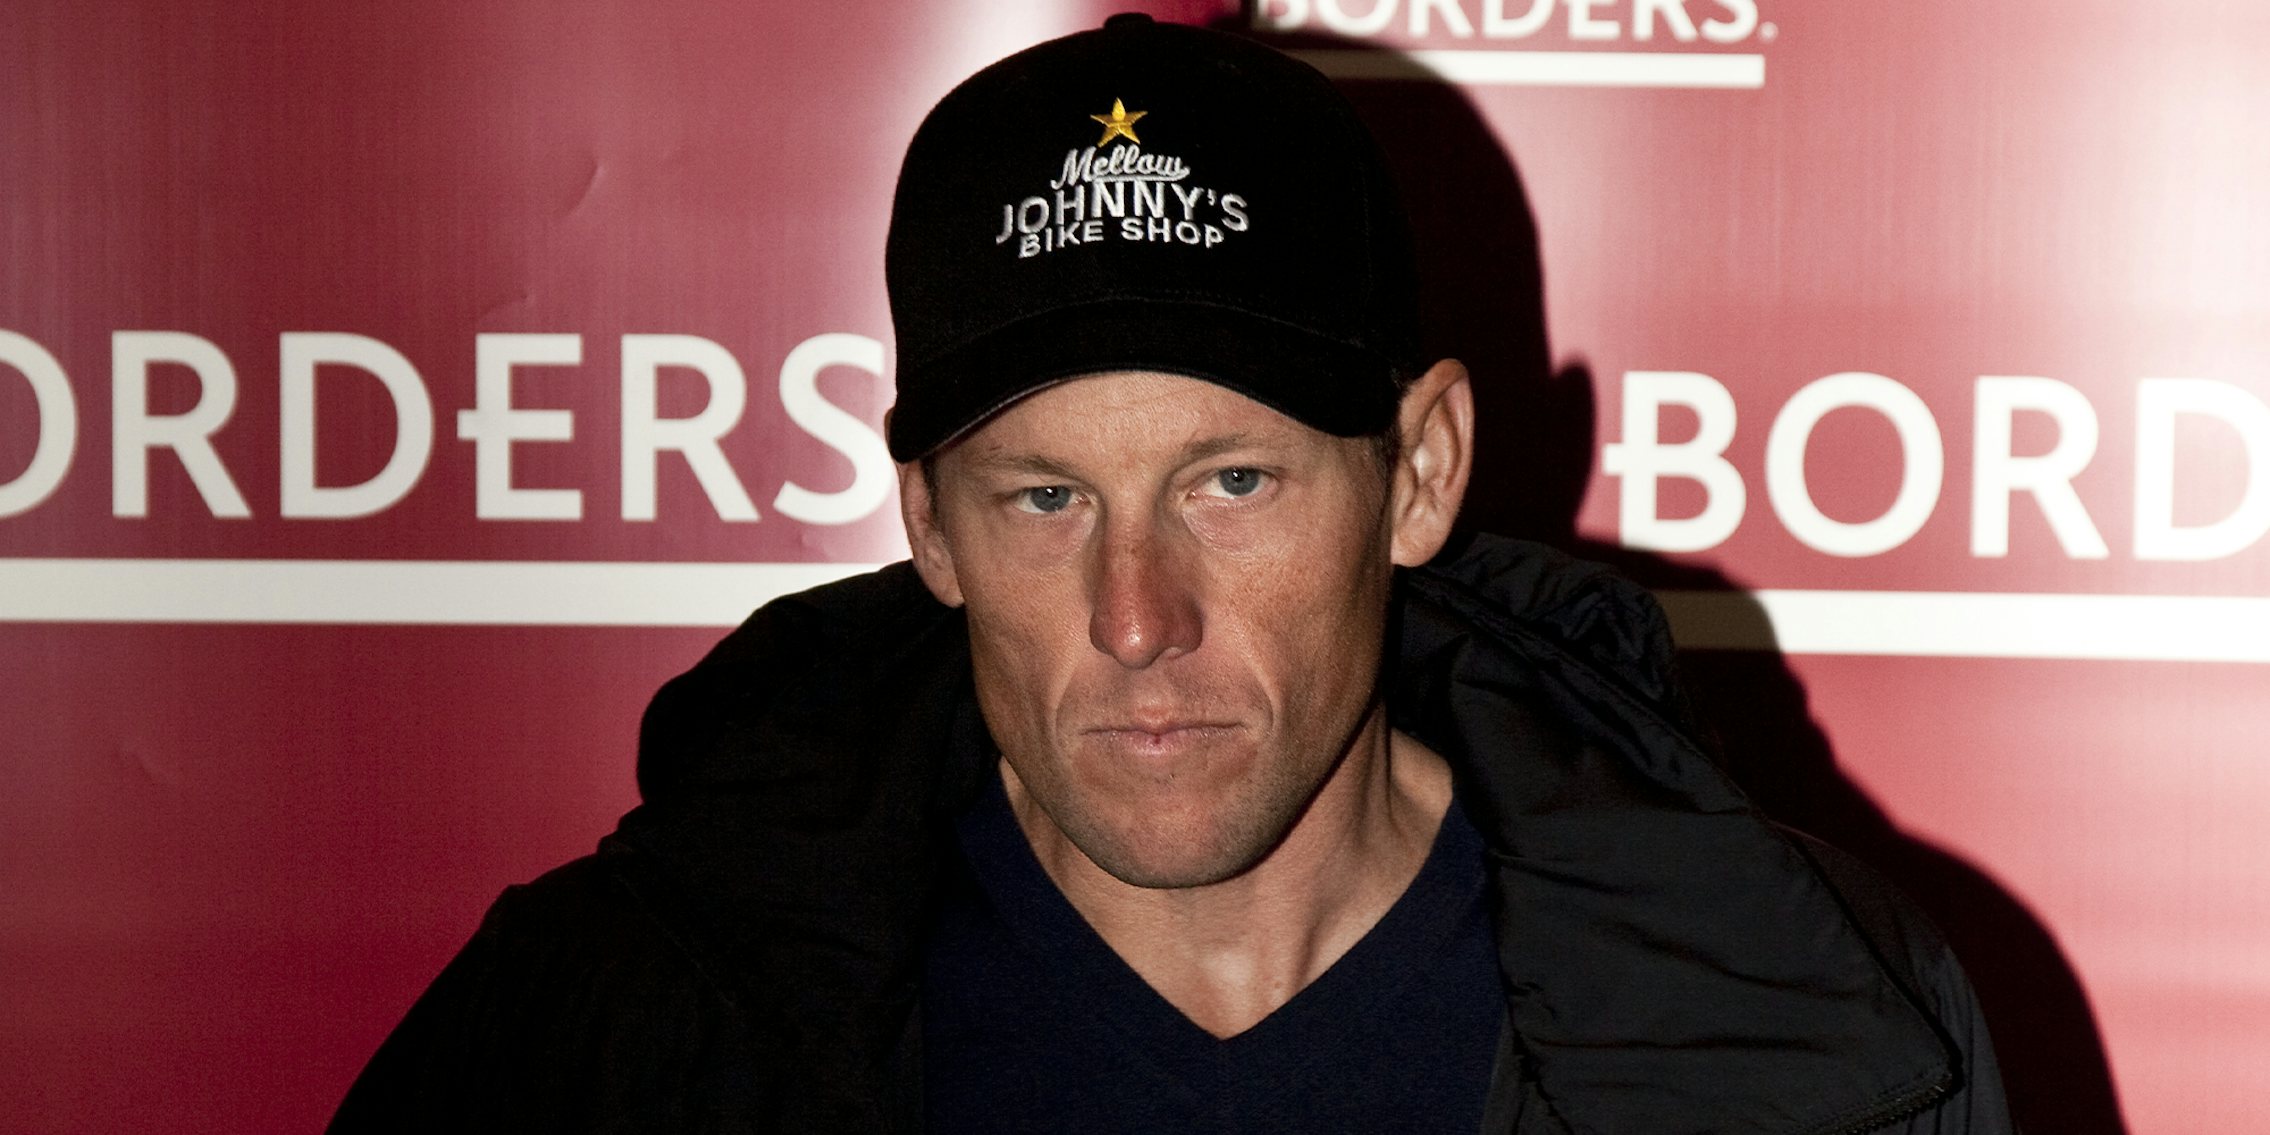 Lance Armstrong faces backlash after complaining about trans athletes